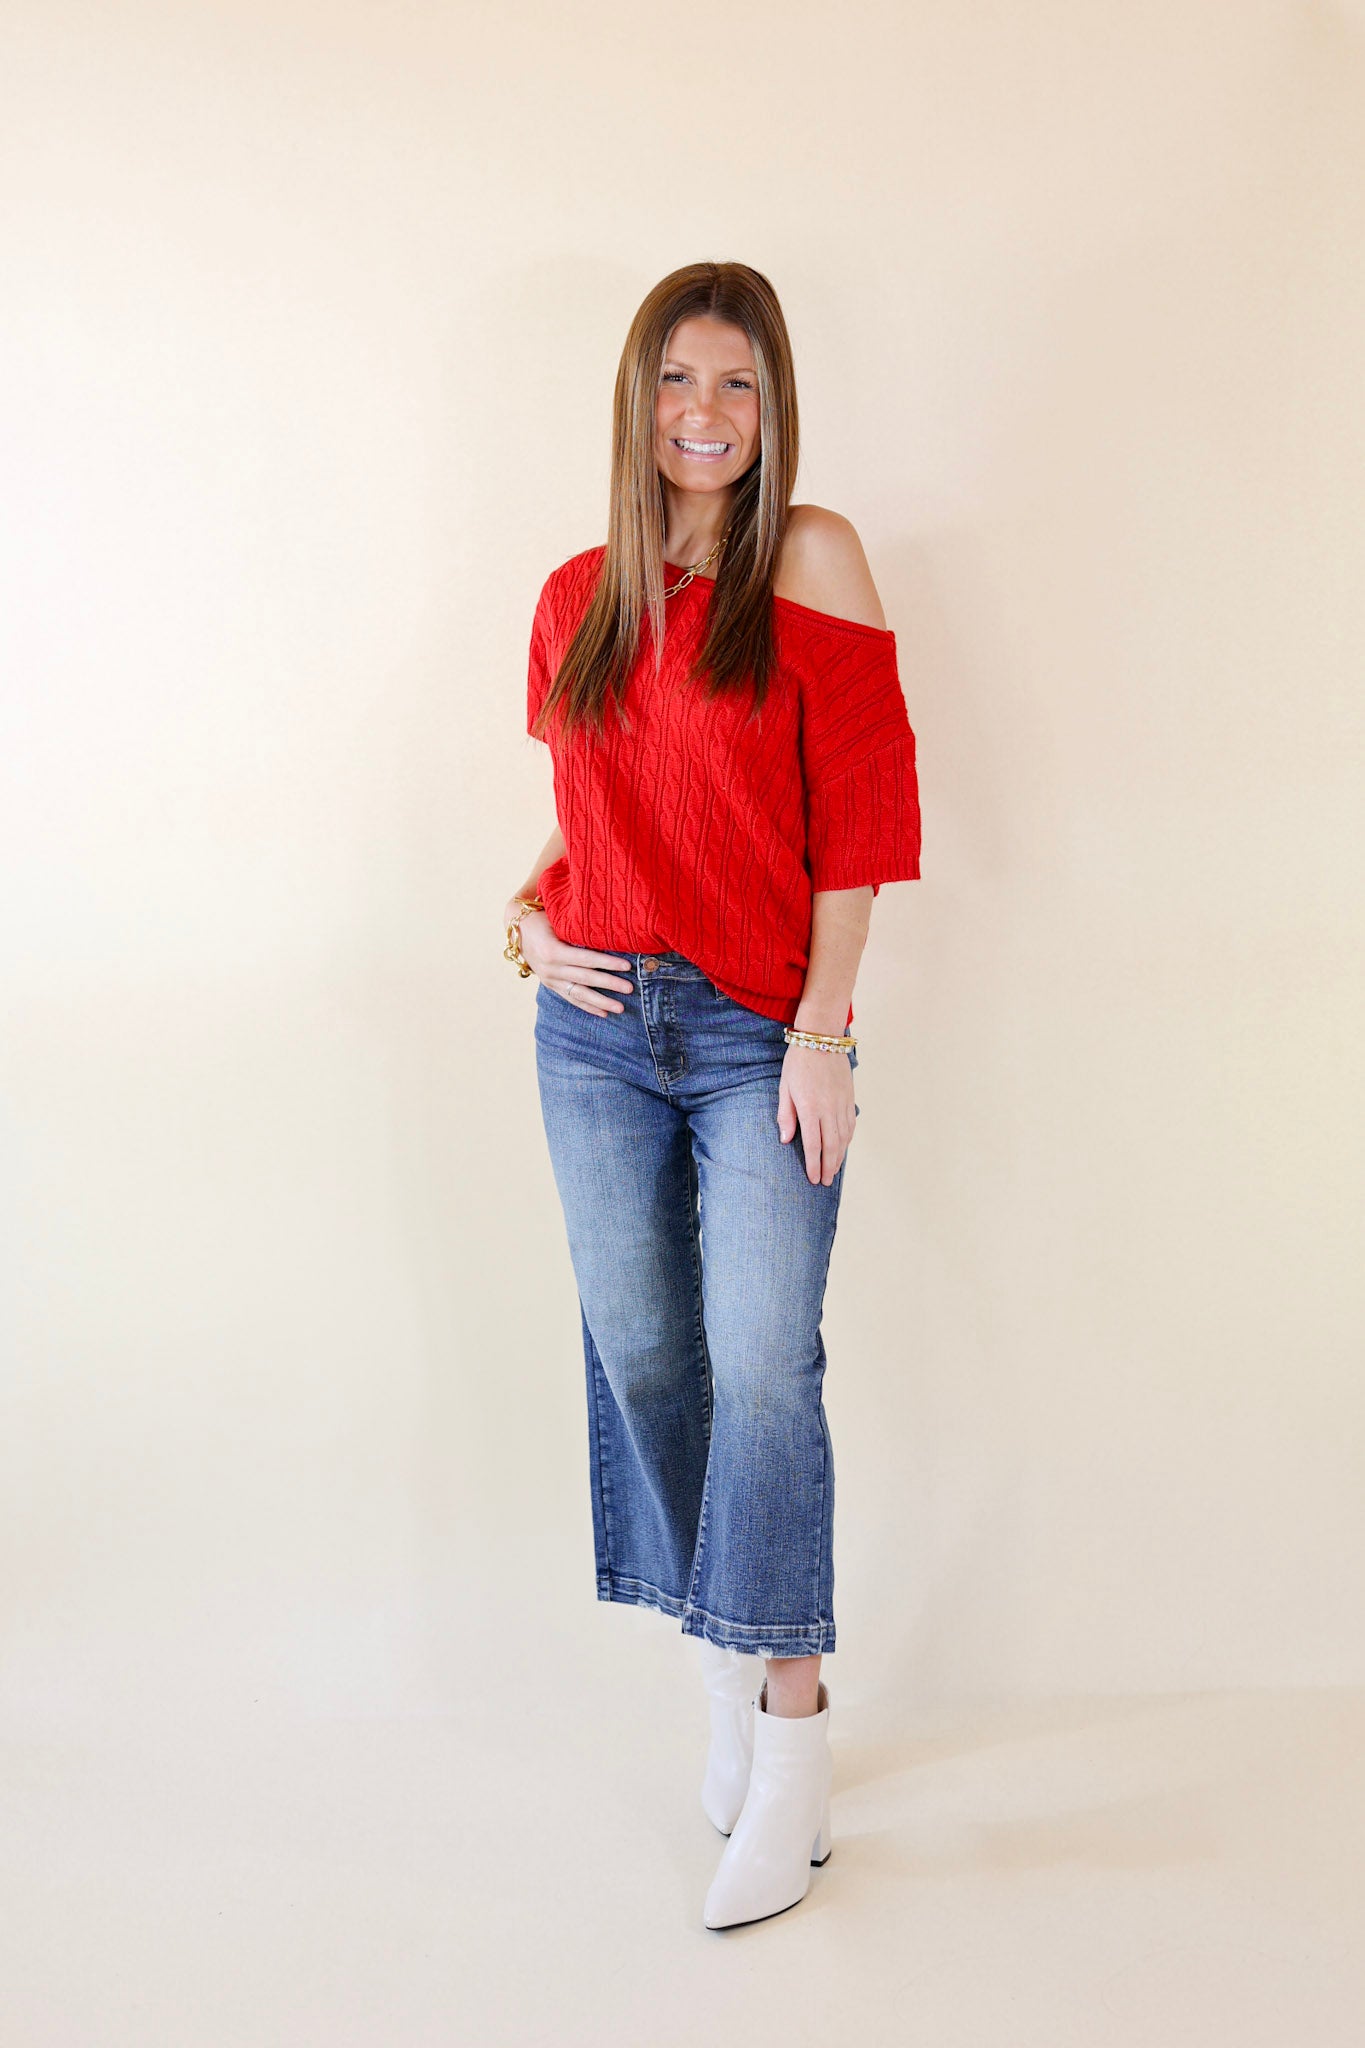 Day Date Short Sleeve Sweater with Scoop Neckline in Red - Giddy Up Glamour Boutique